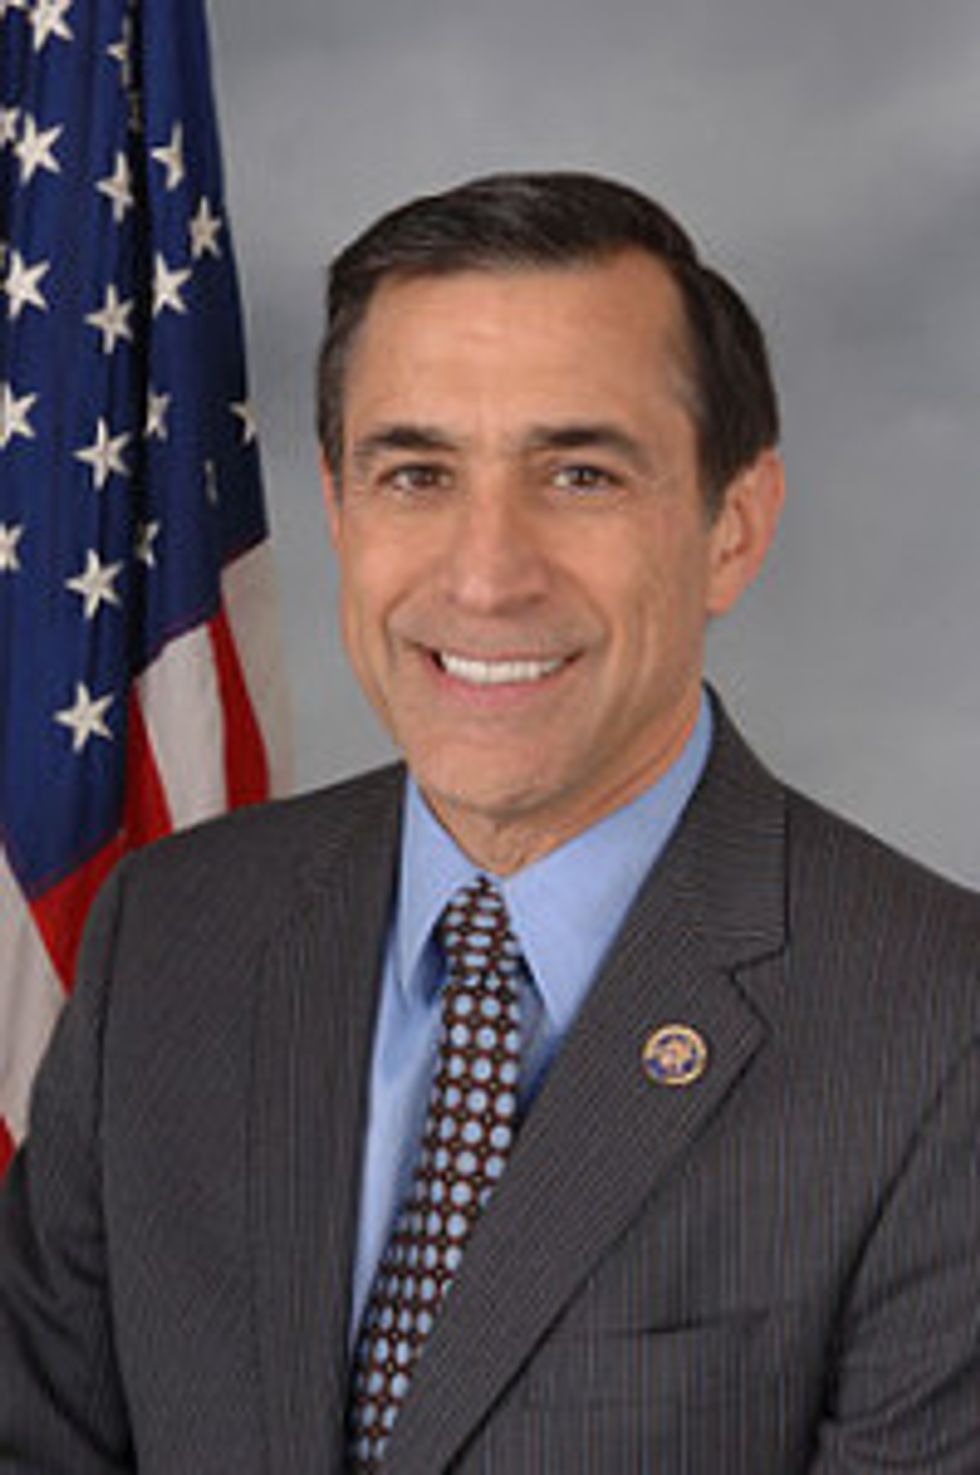 Darrell Issa Gets Dressed Down By Federal Court Judge For Being Stupid, Arrogant Whiny-Baby